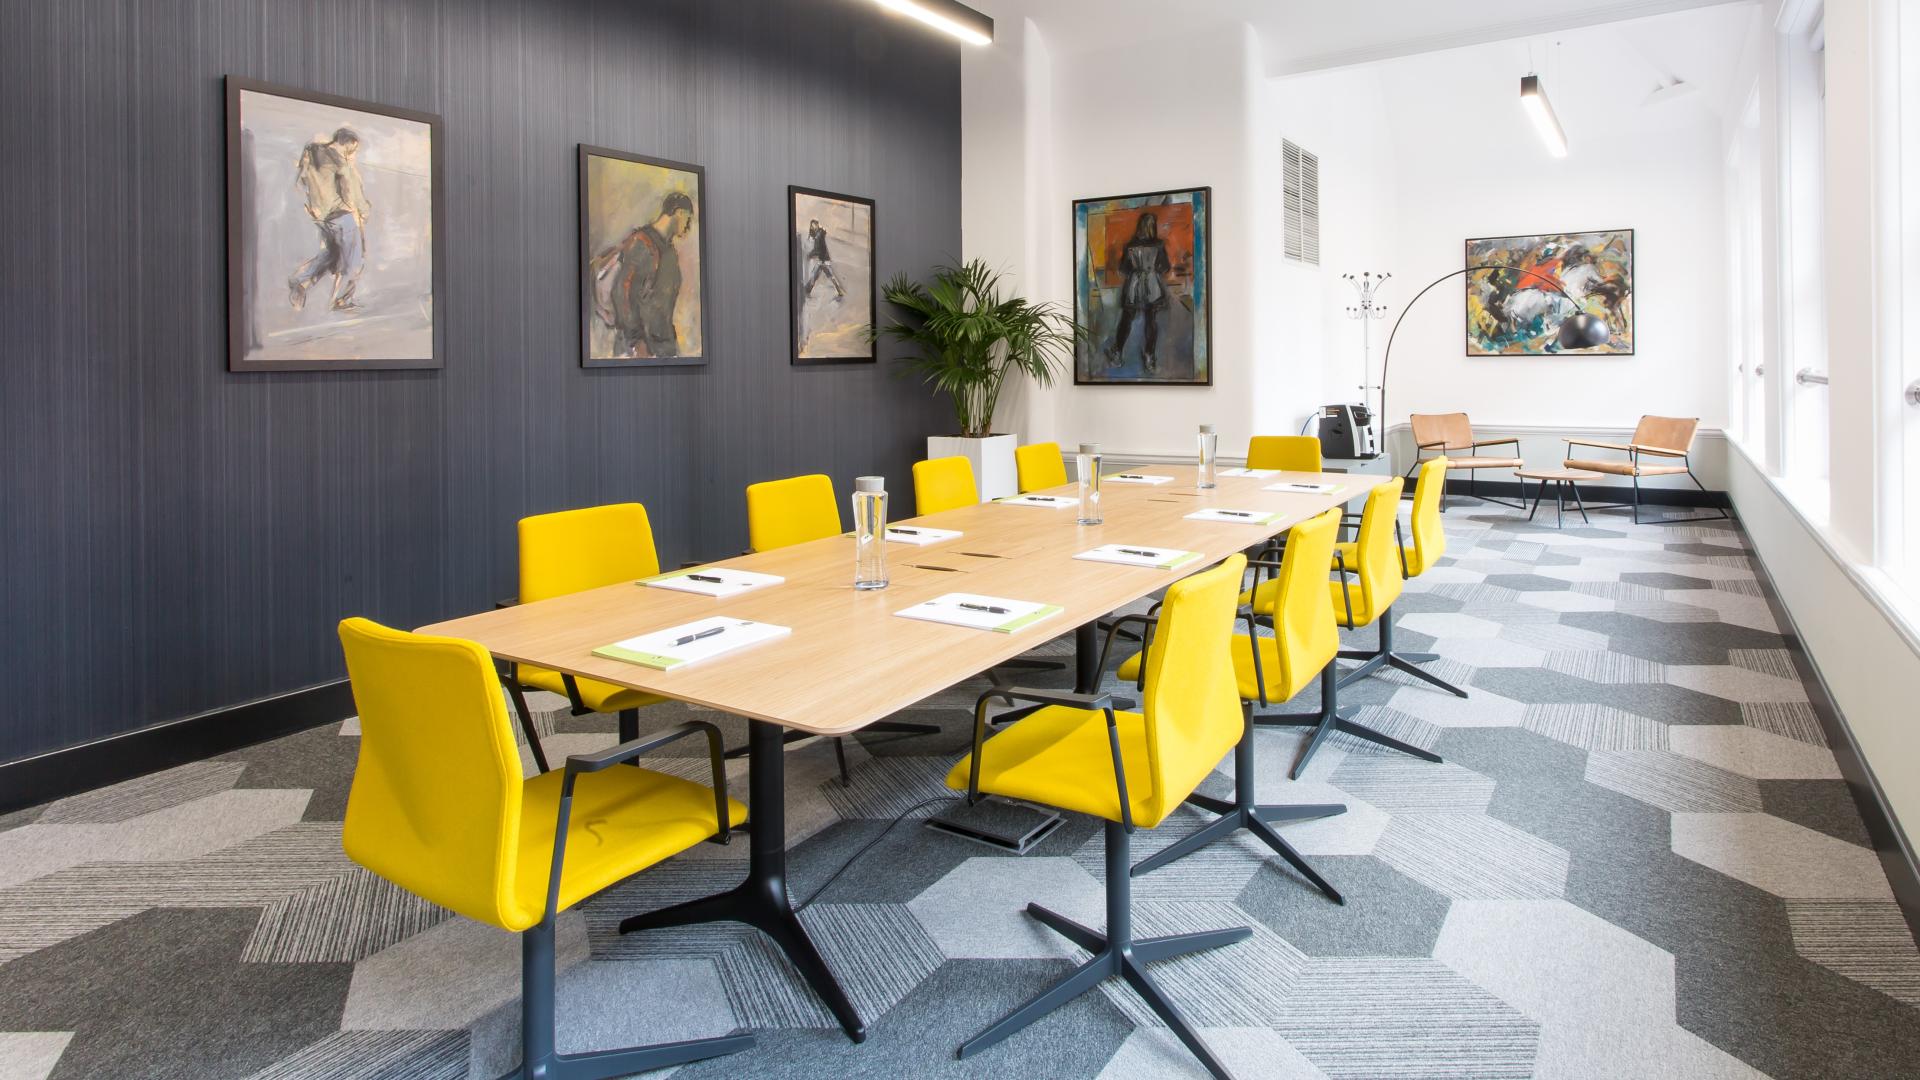 Meeting Rooms for Hire in Manchester